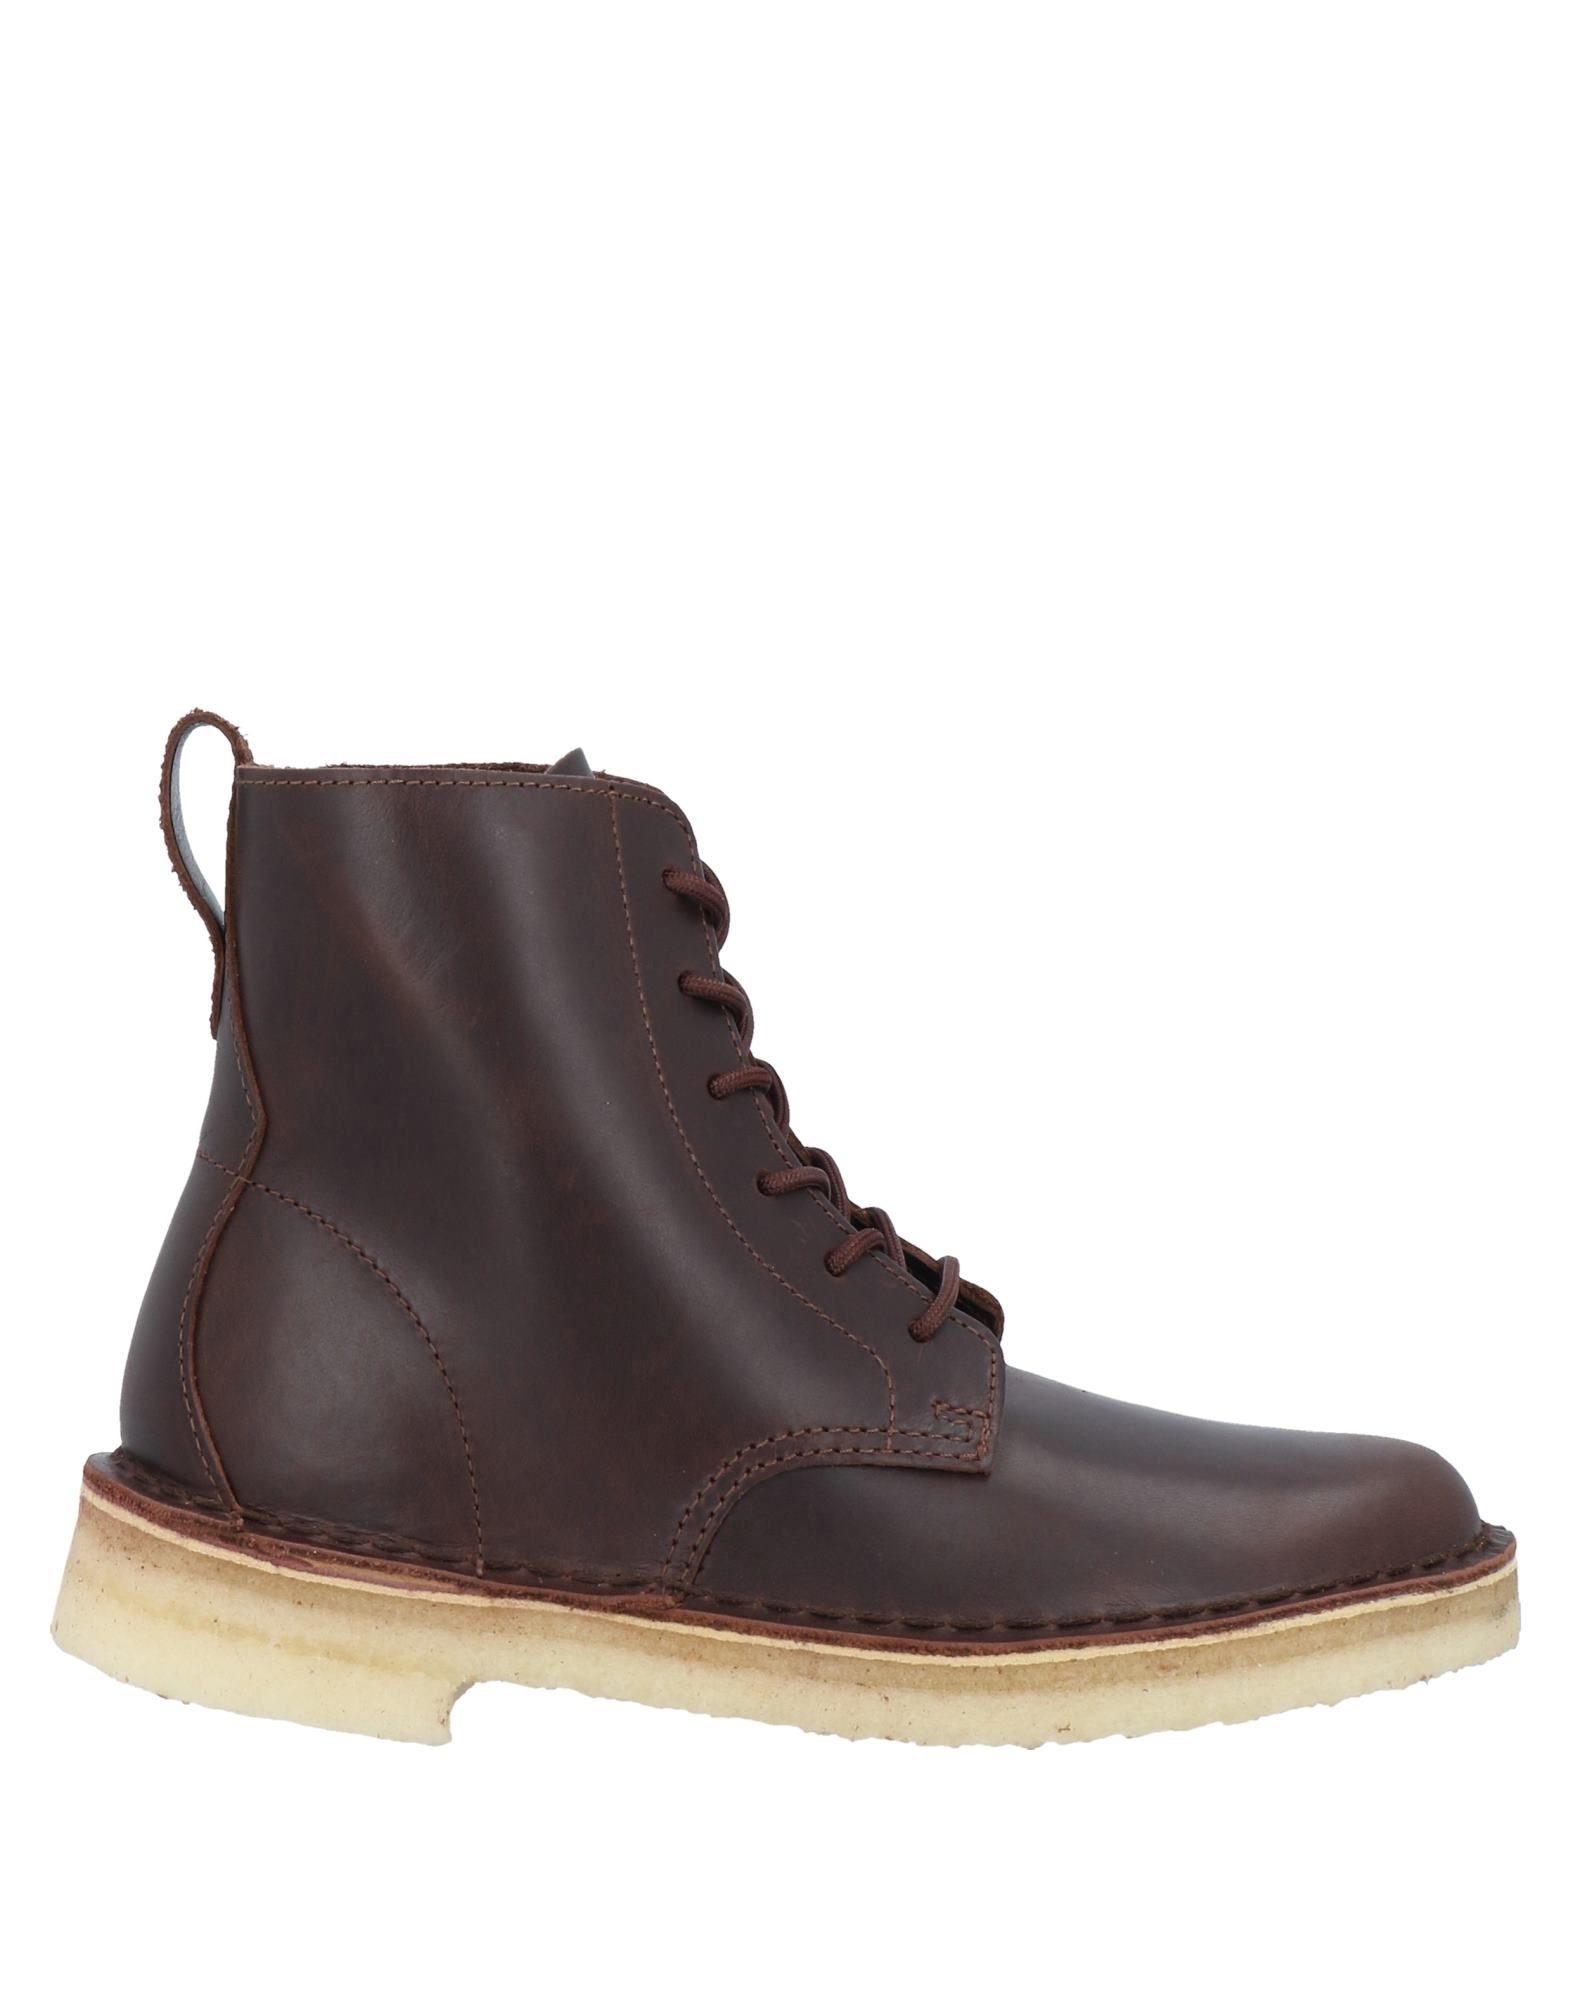 Clarks Originals Ankle Boots In Cocoa | ModeSens